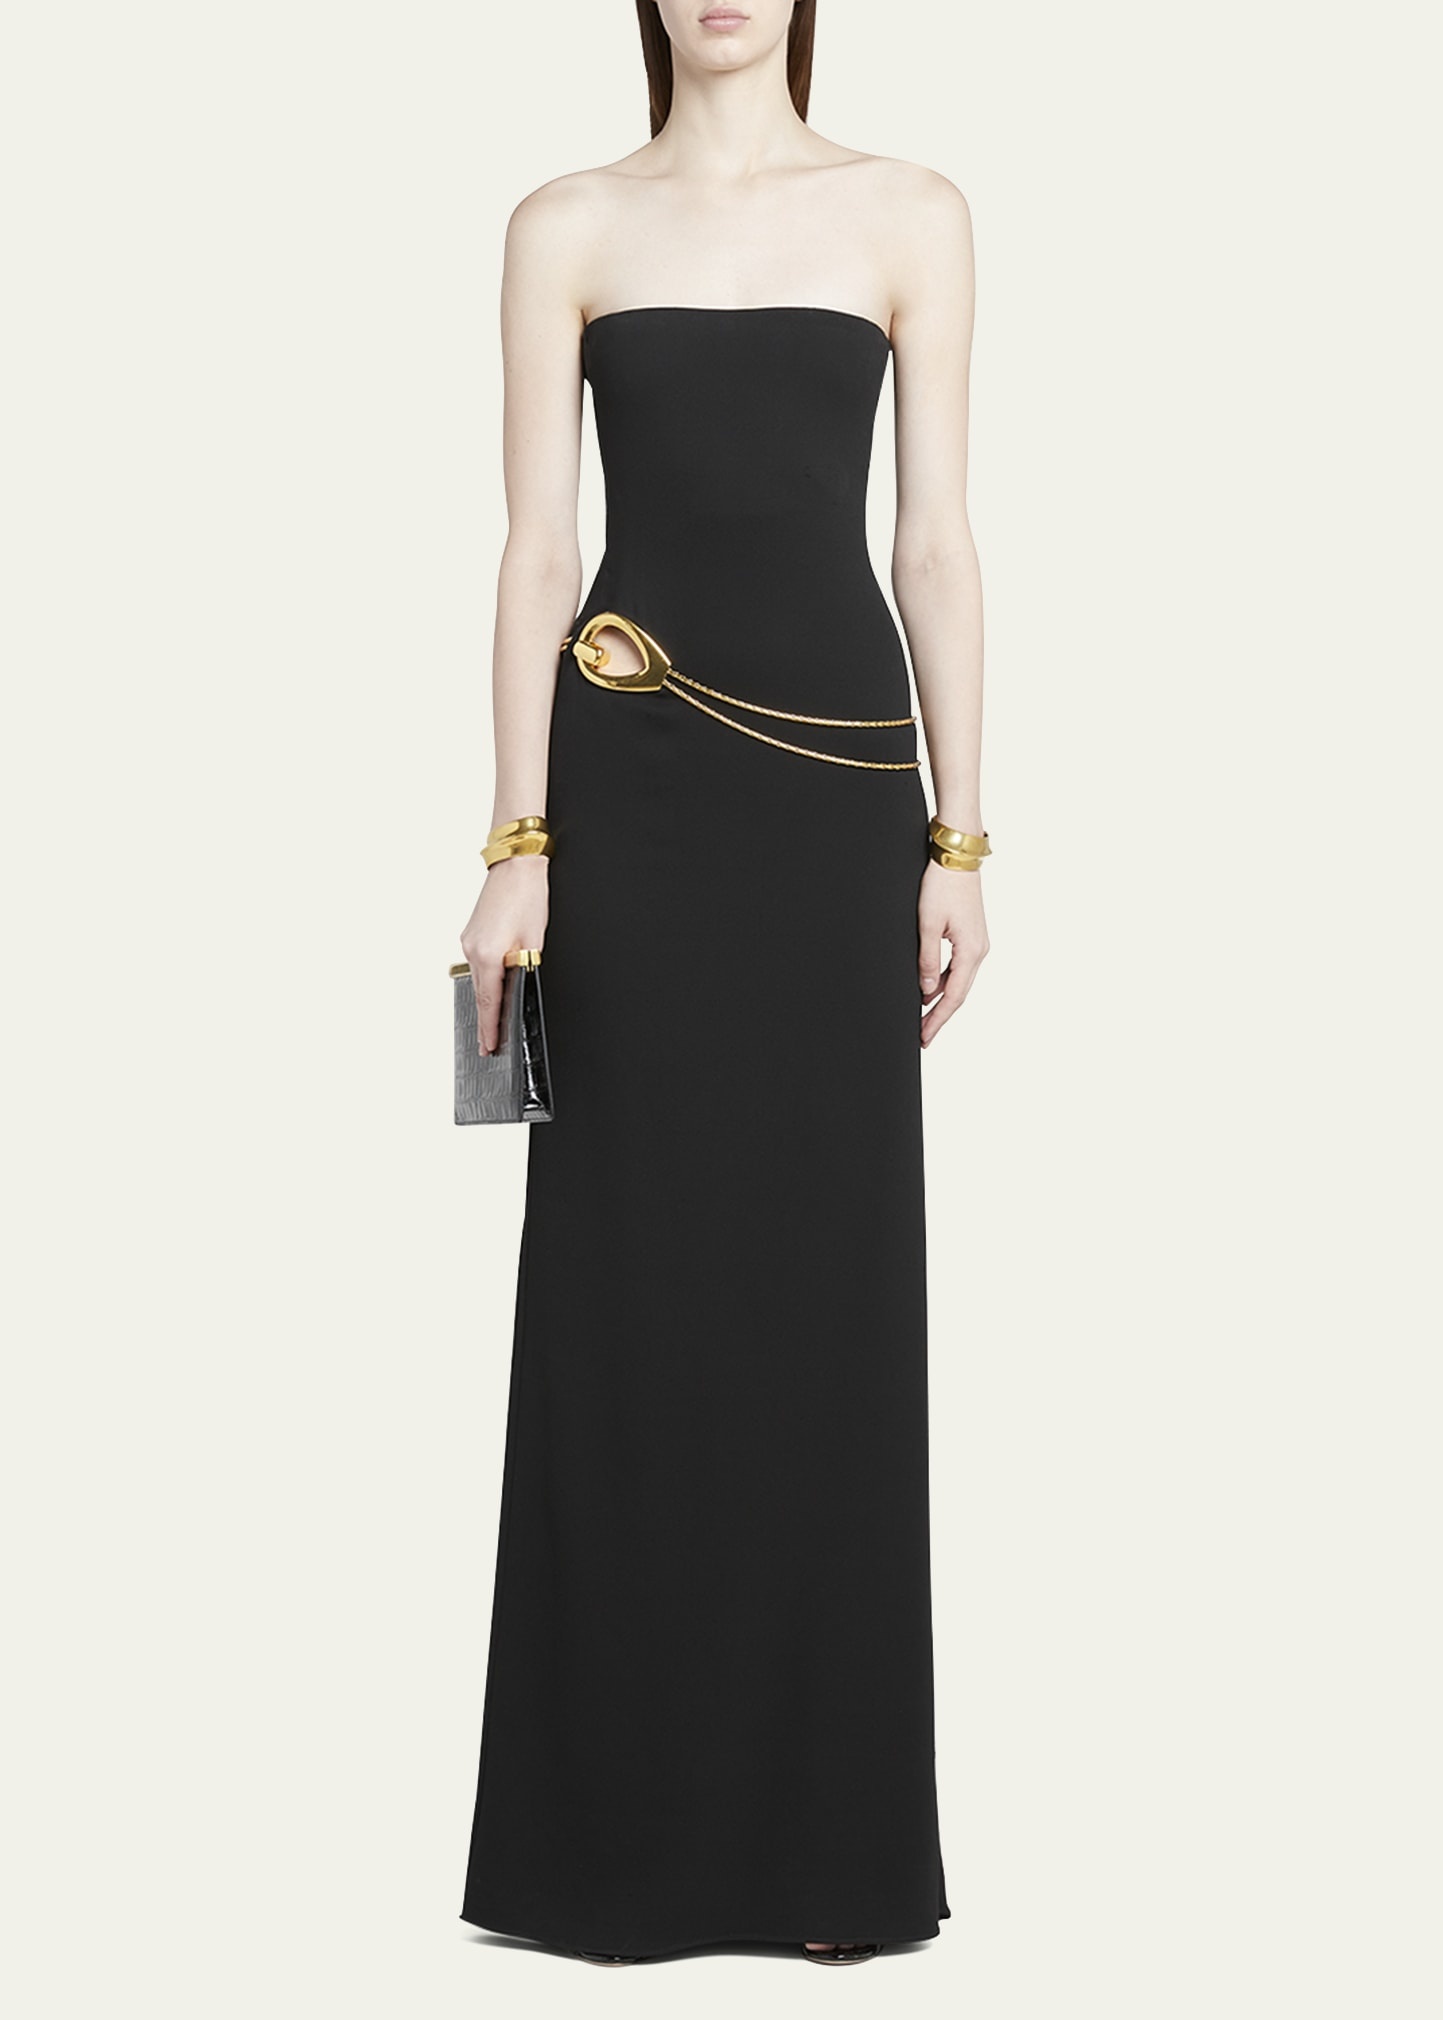 Stretch Sable Strapless Evening Dress with Cutout Detail - 4